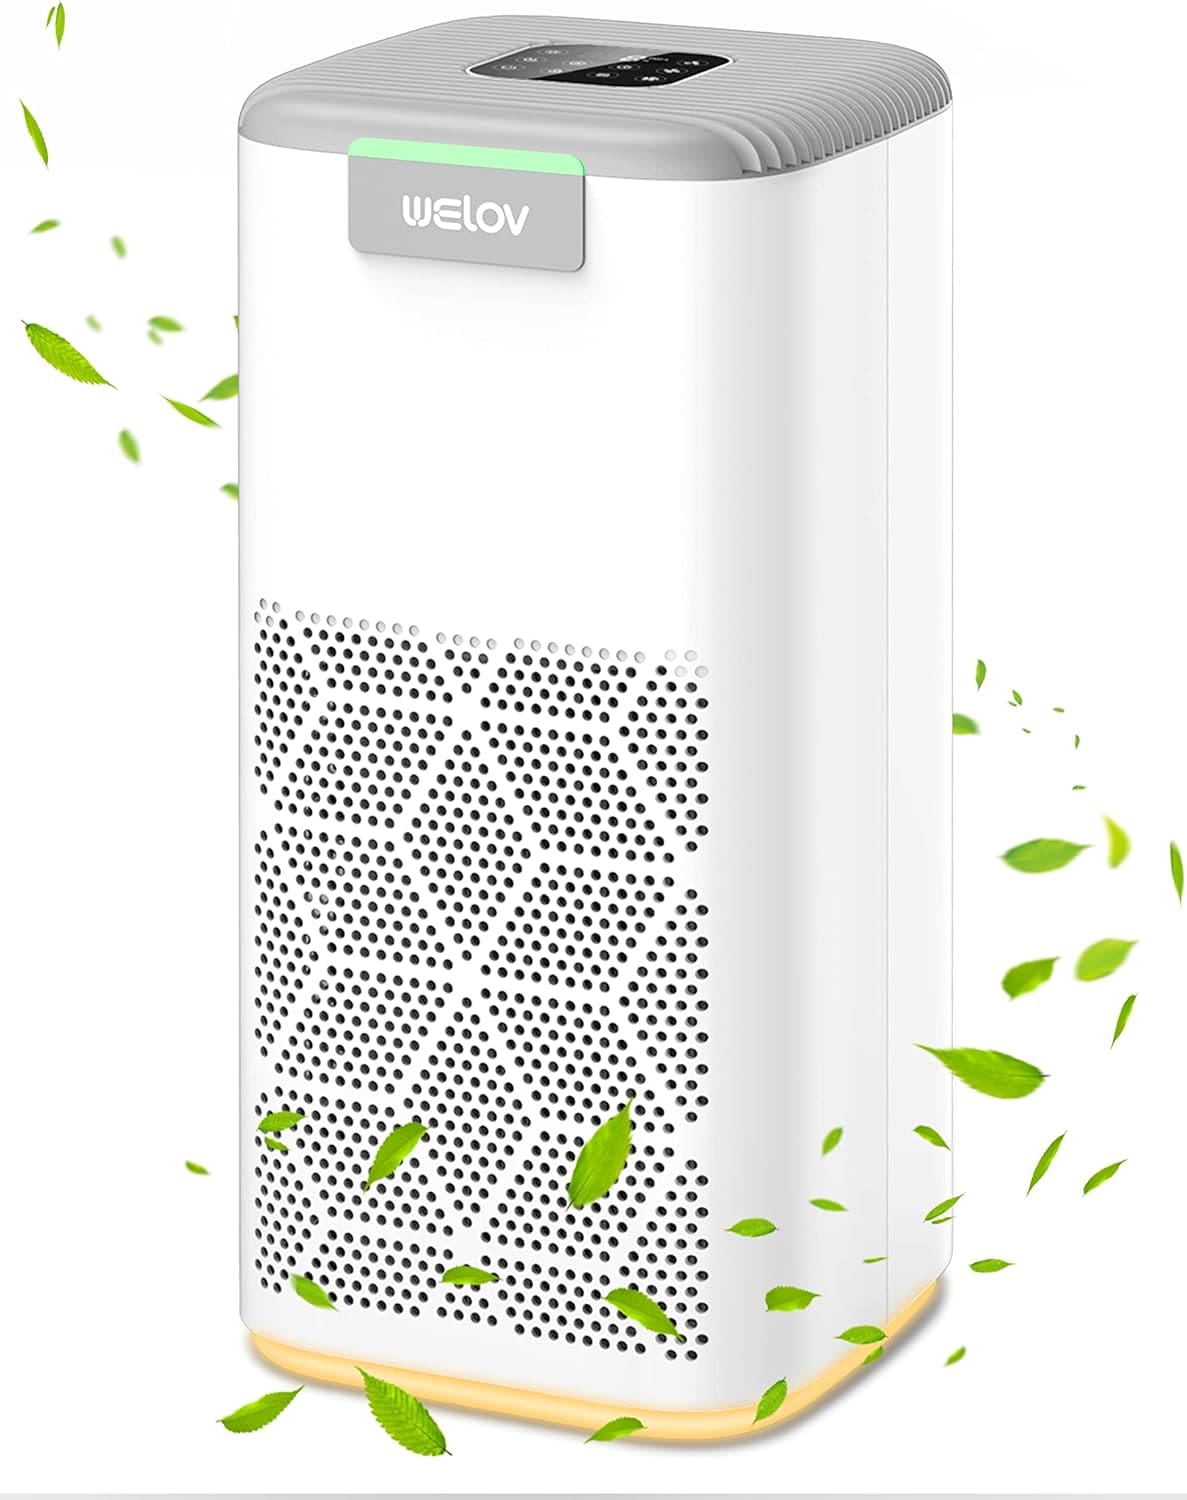 welov air purifiers p200 pro review